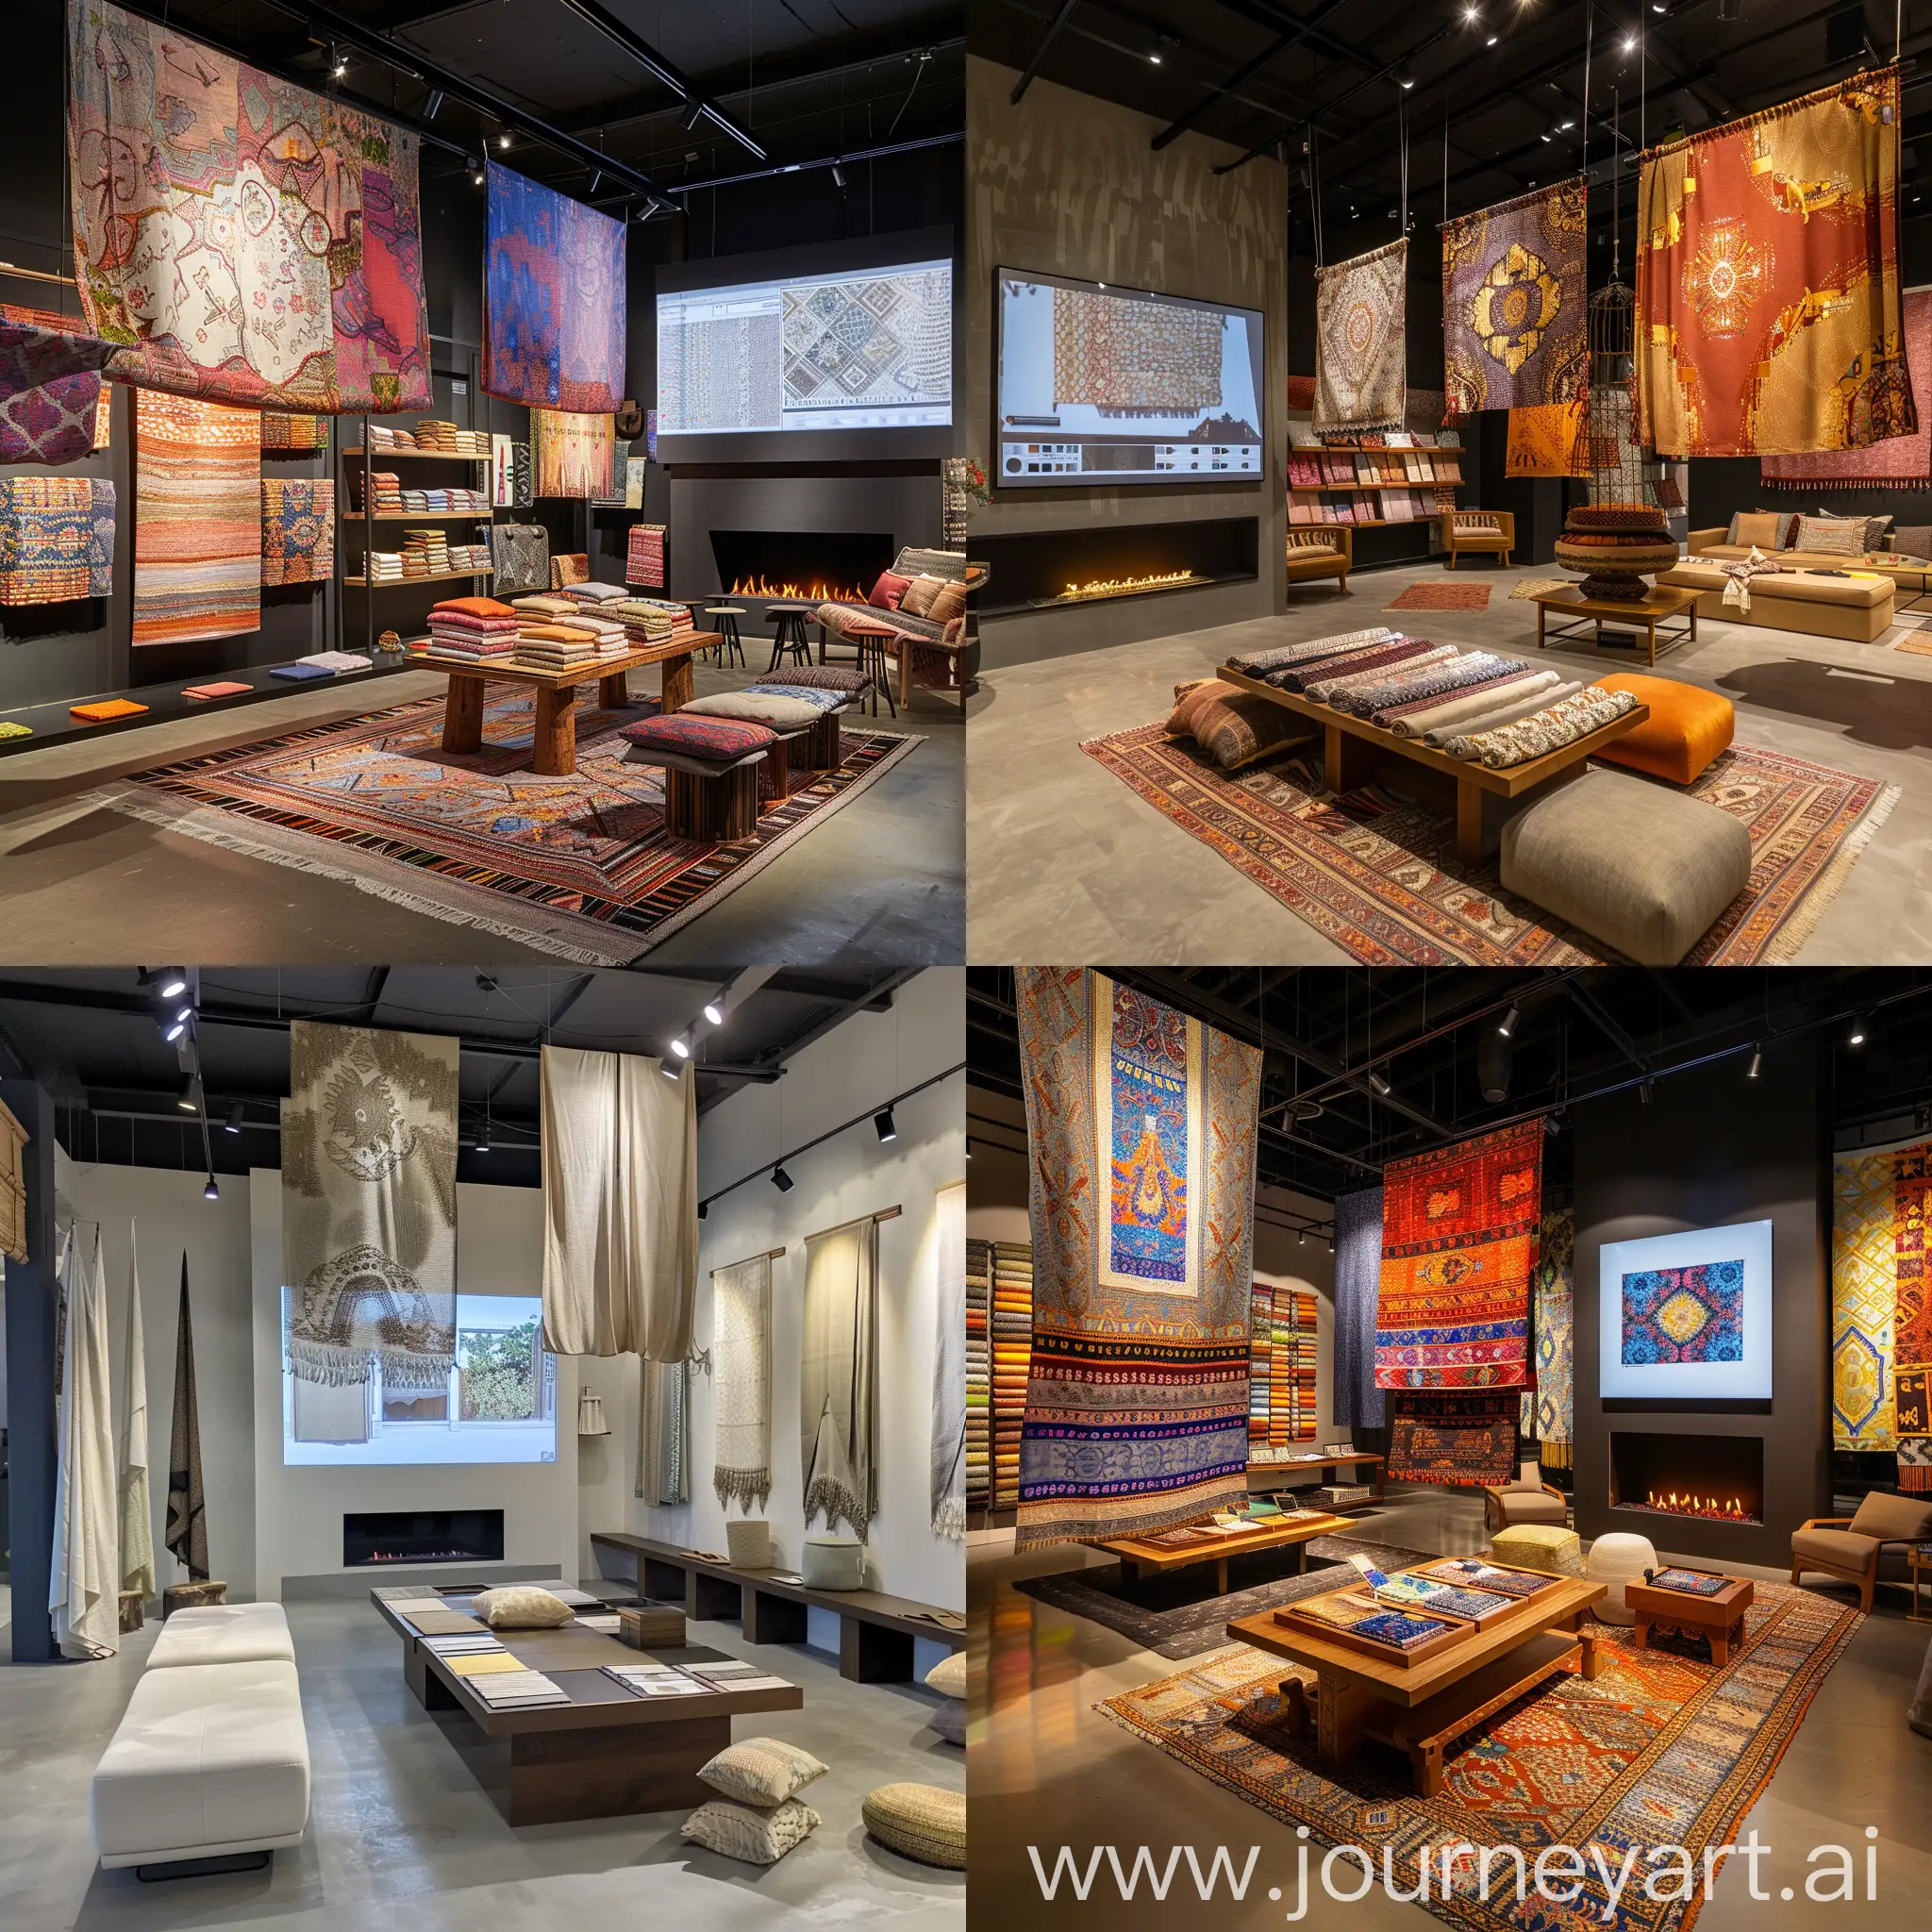 fabric shorwroom interior inspired by indonesian culture mix with modern, with hang display, seating area, display table, fire place, samples display, and fabric virtual visualisation screen on the wall, electric colour palette
